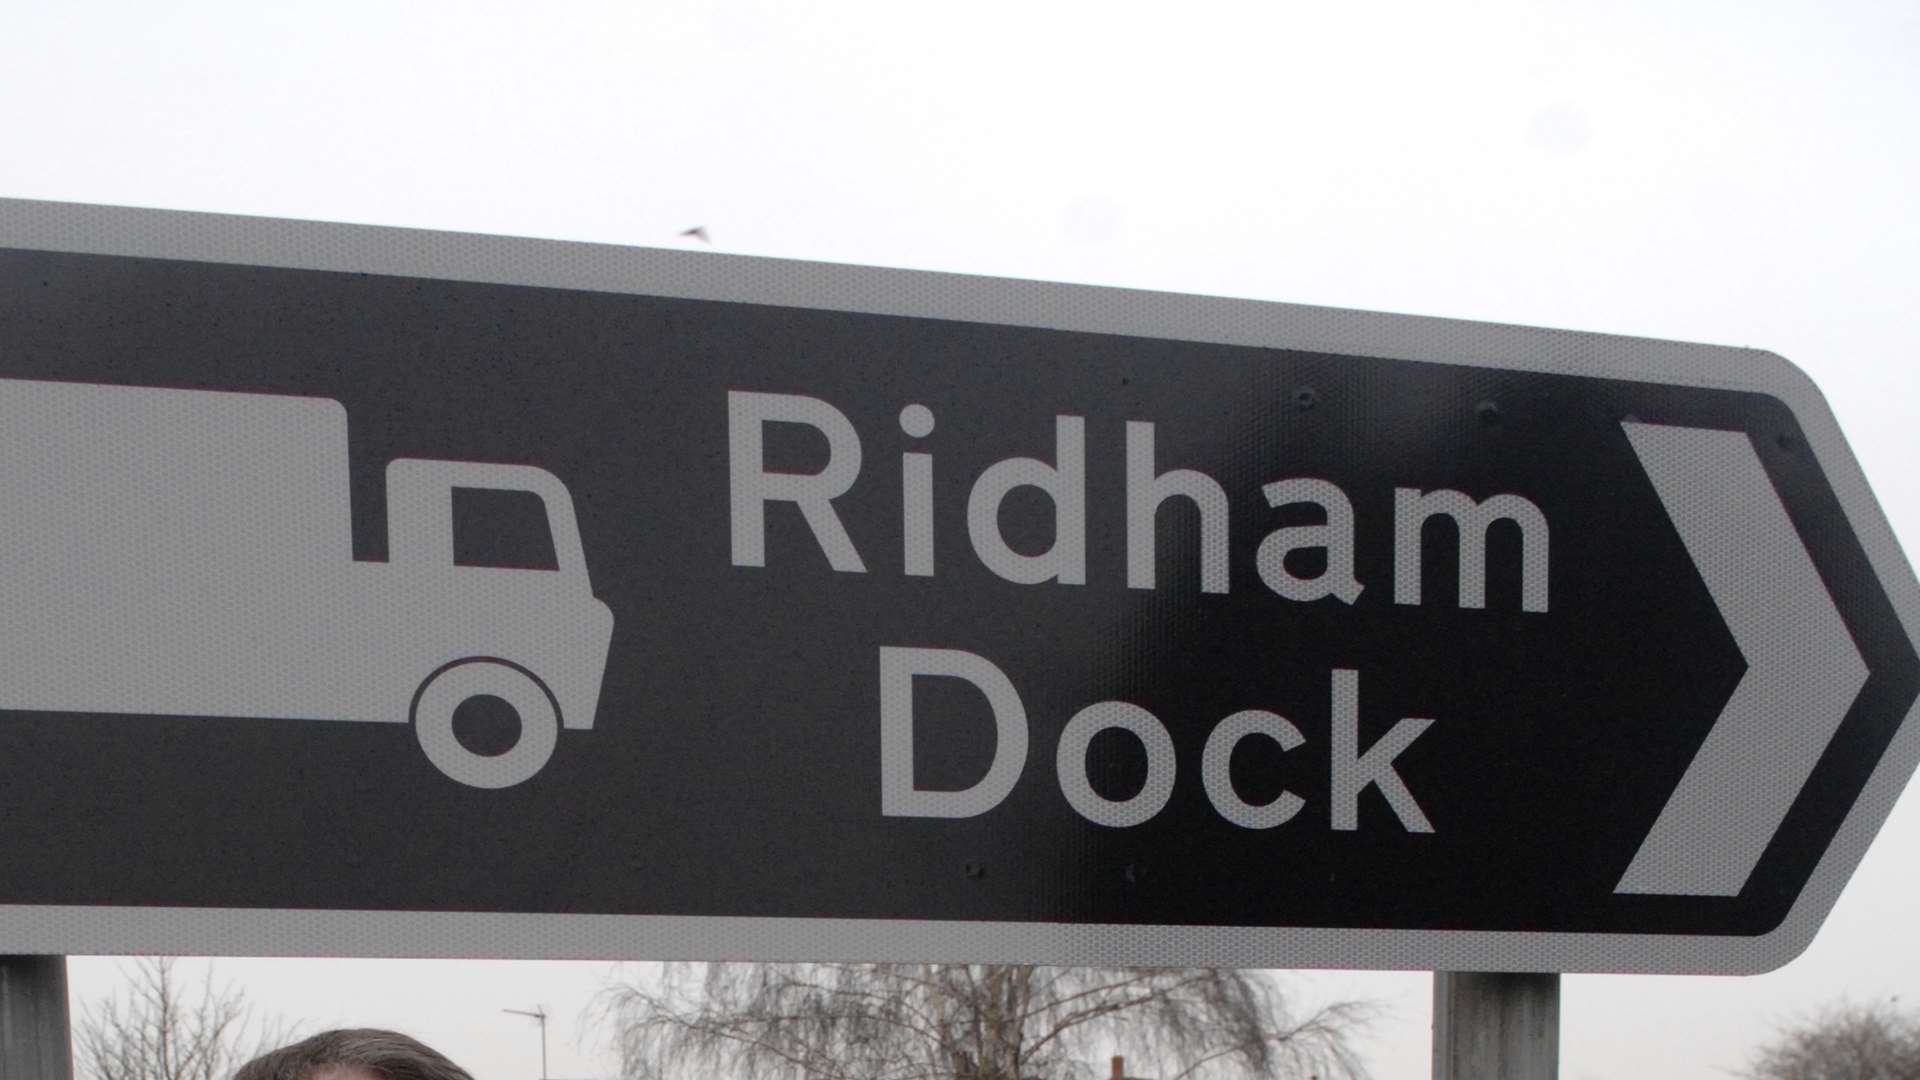 The accident happened at Ridham Dock, Iwade